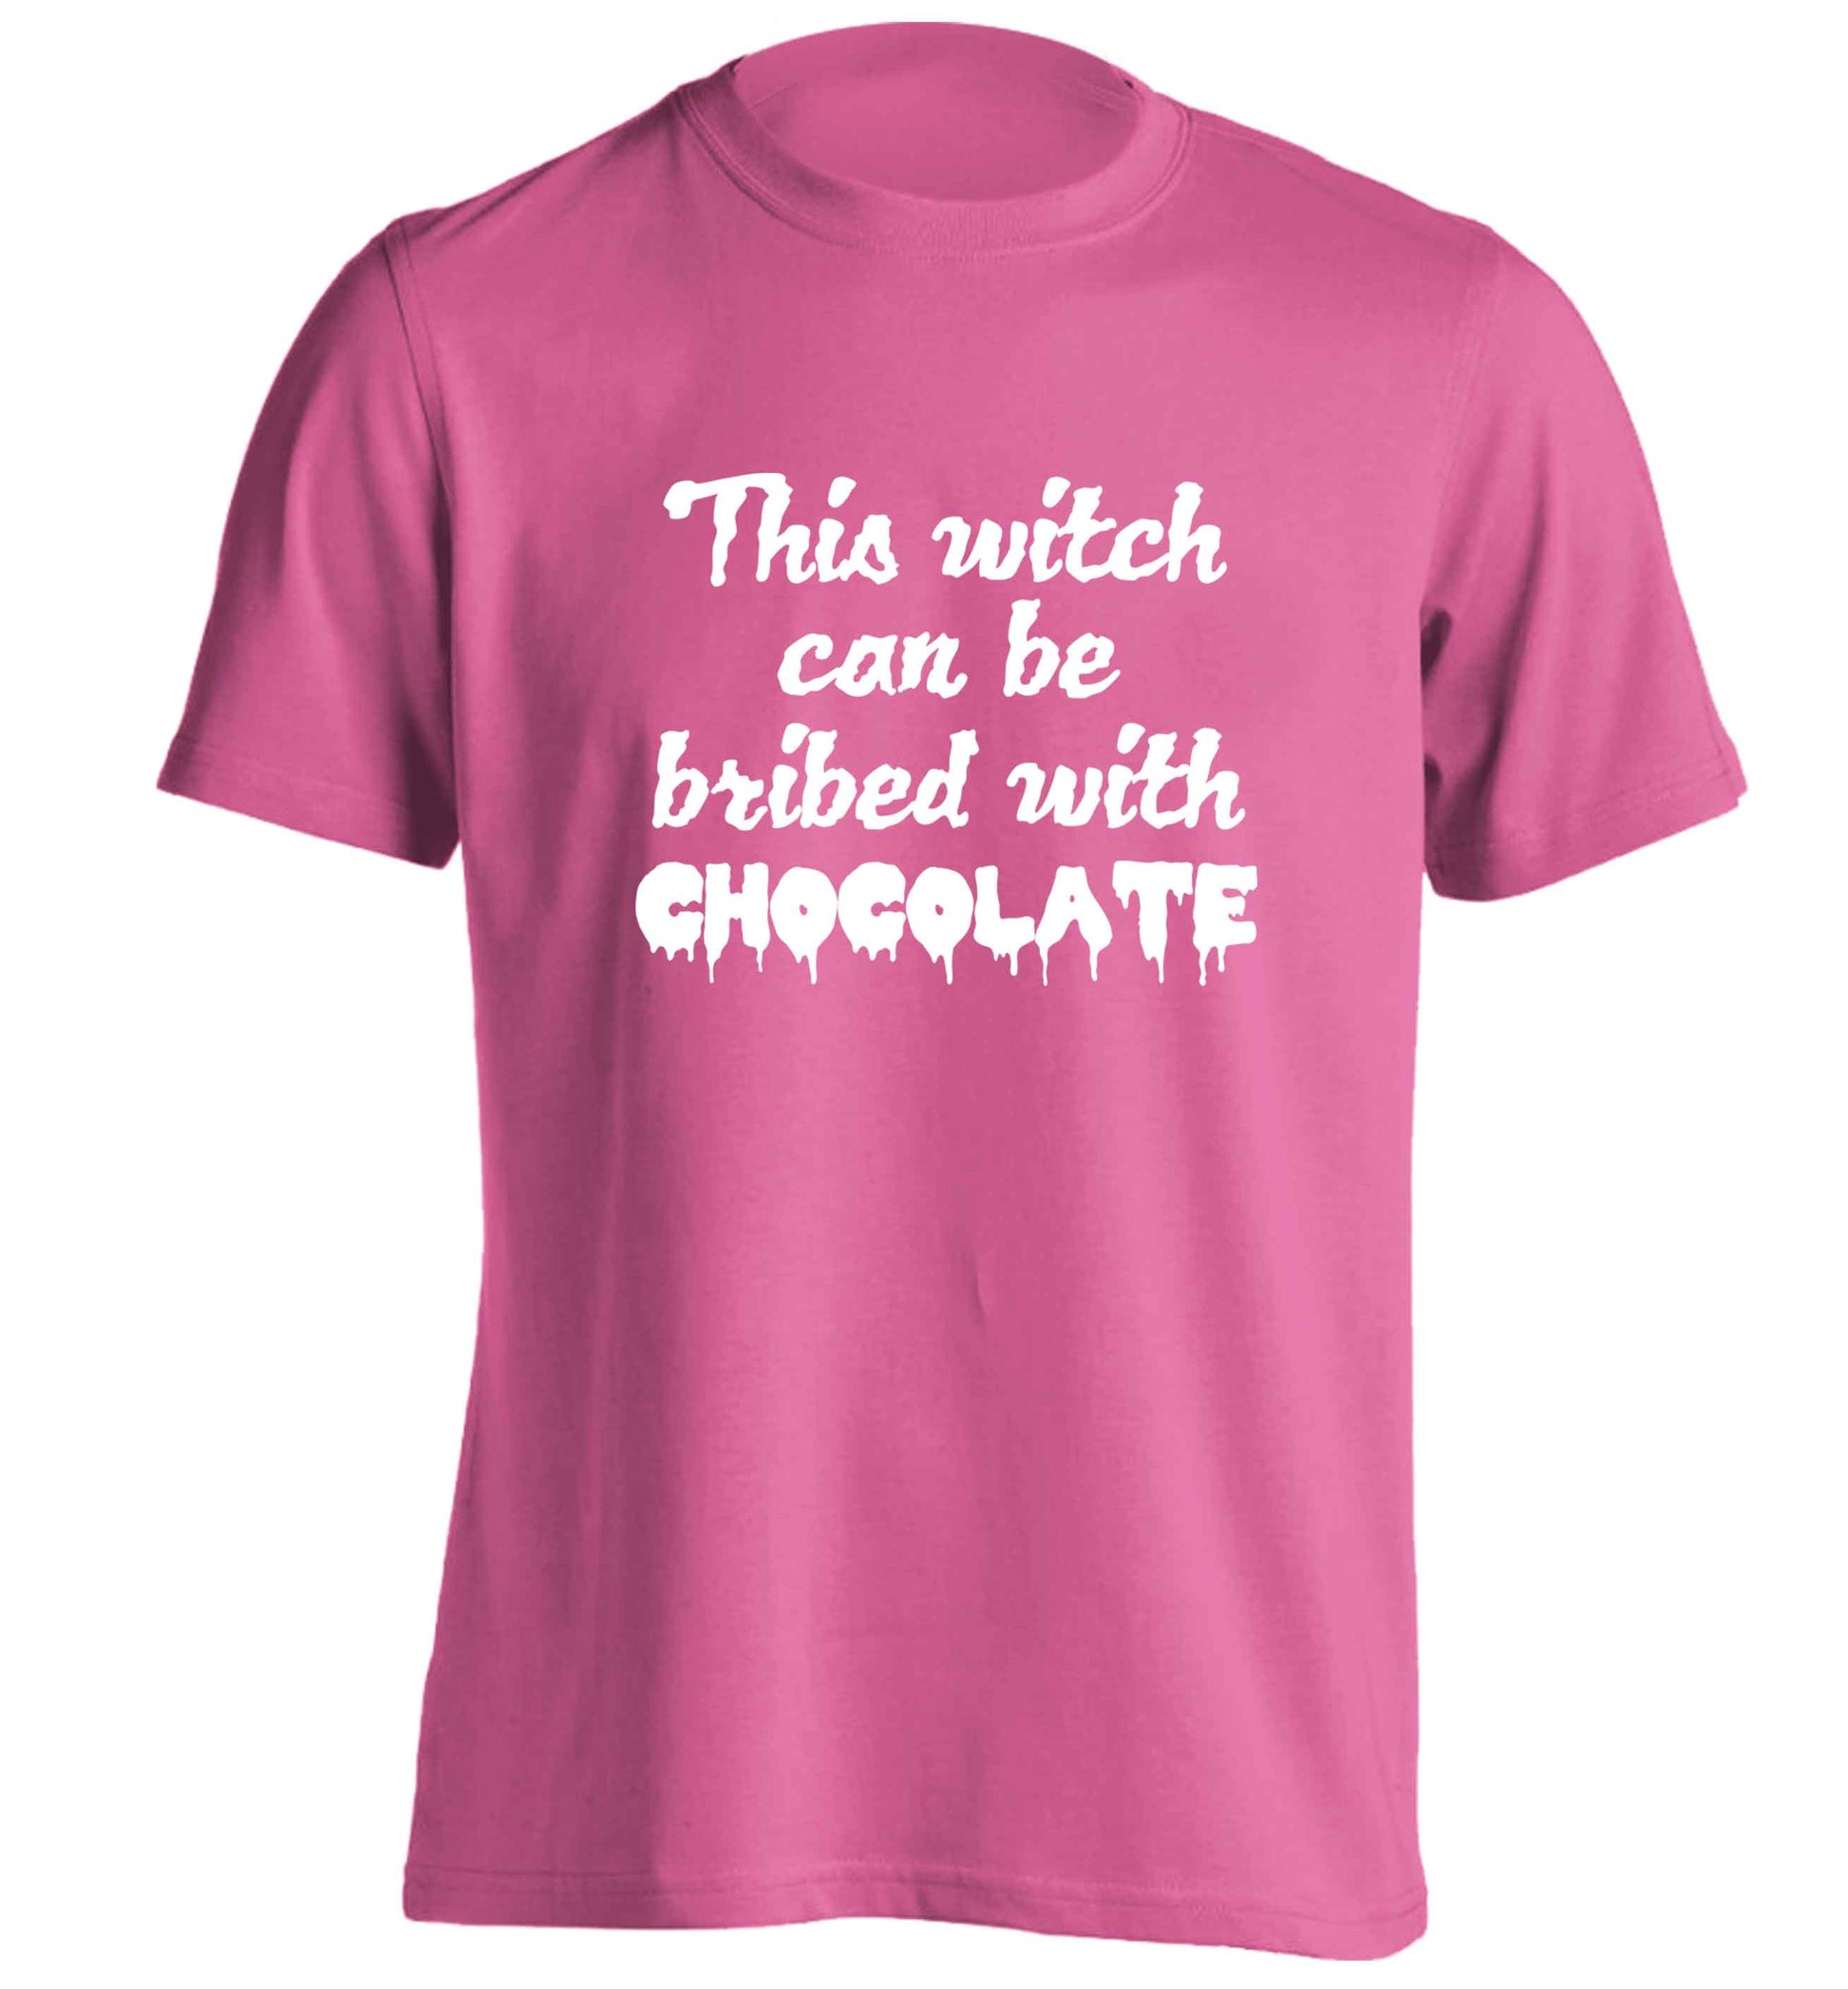 This witch can be bribed with chocolate adults unisex pink Tshirt 2XL